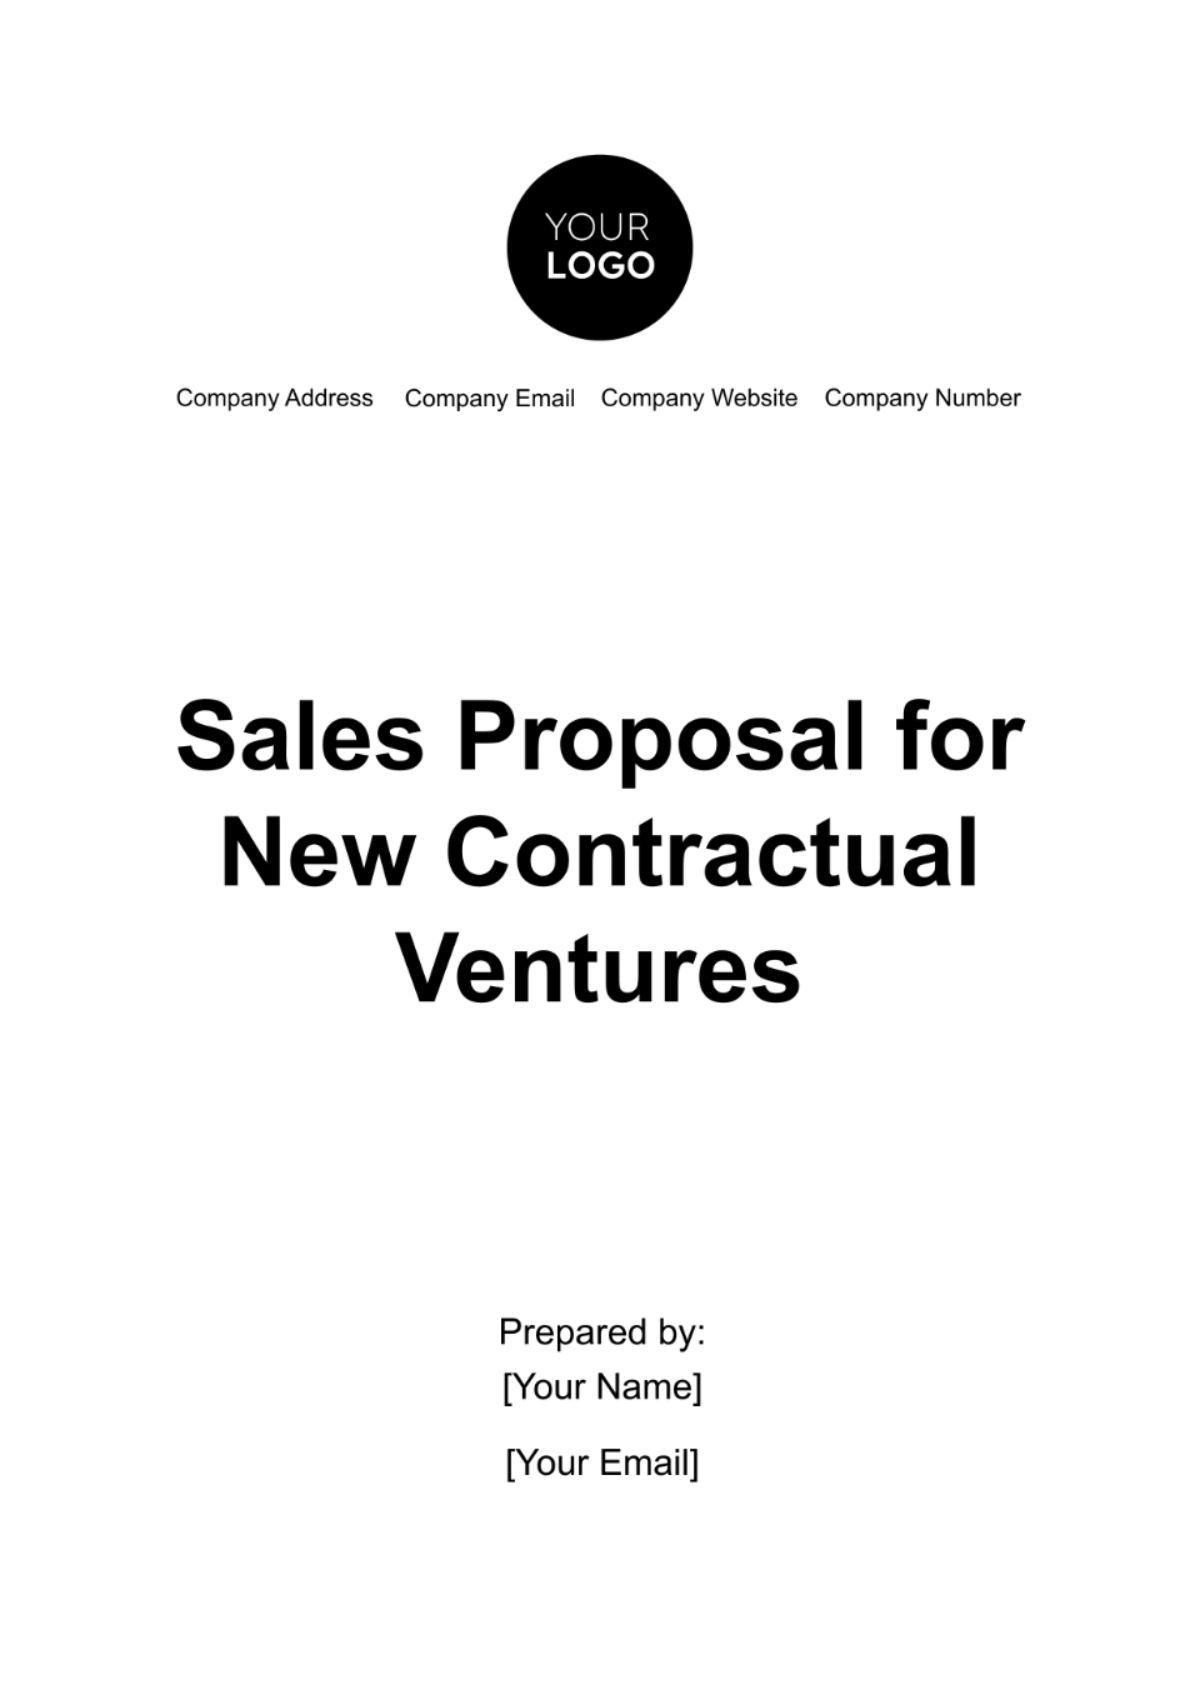 Free Sales Proposal for New Contractual Ventures Template